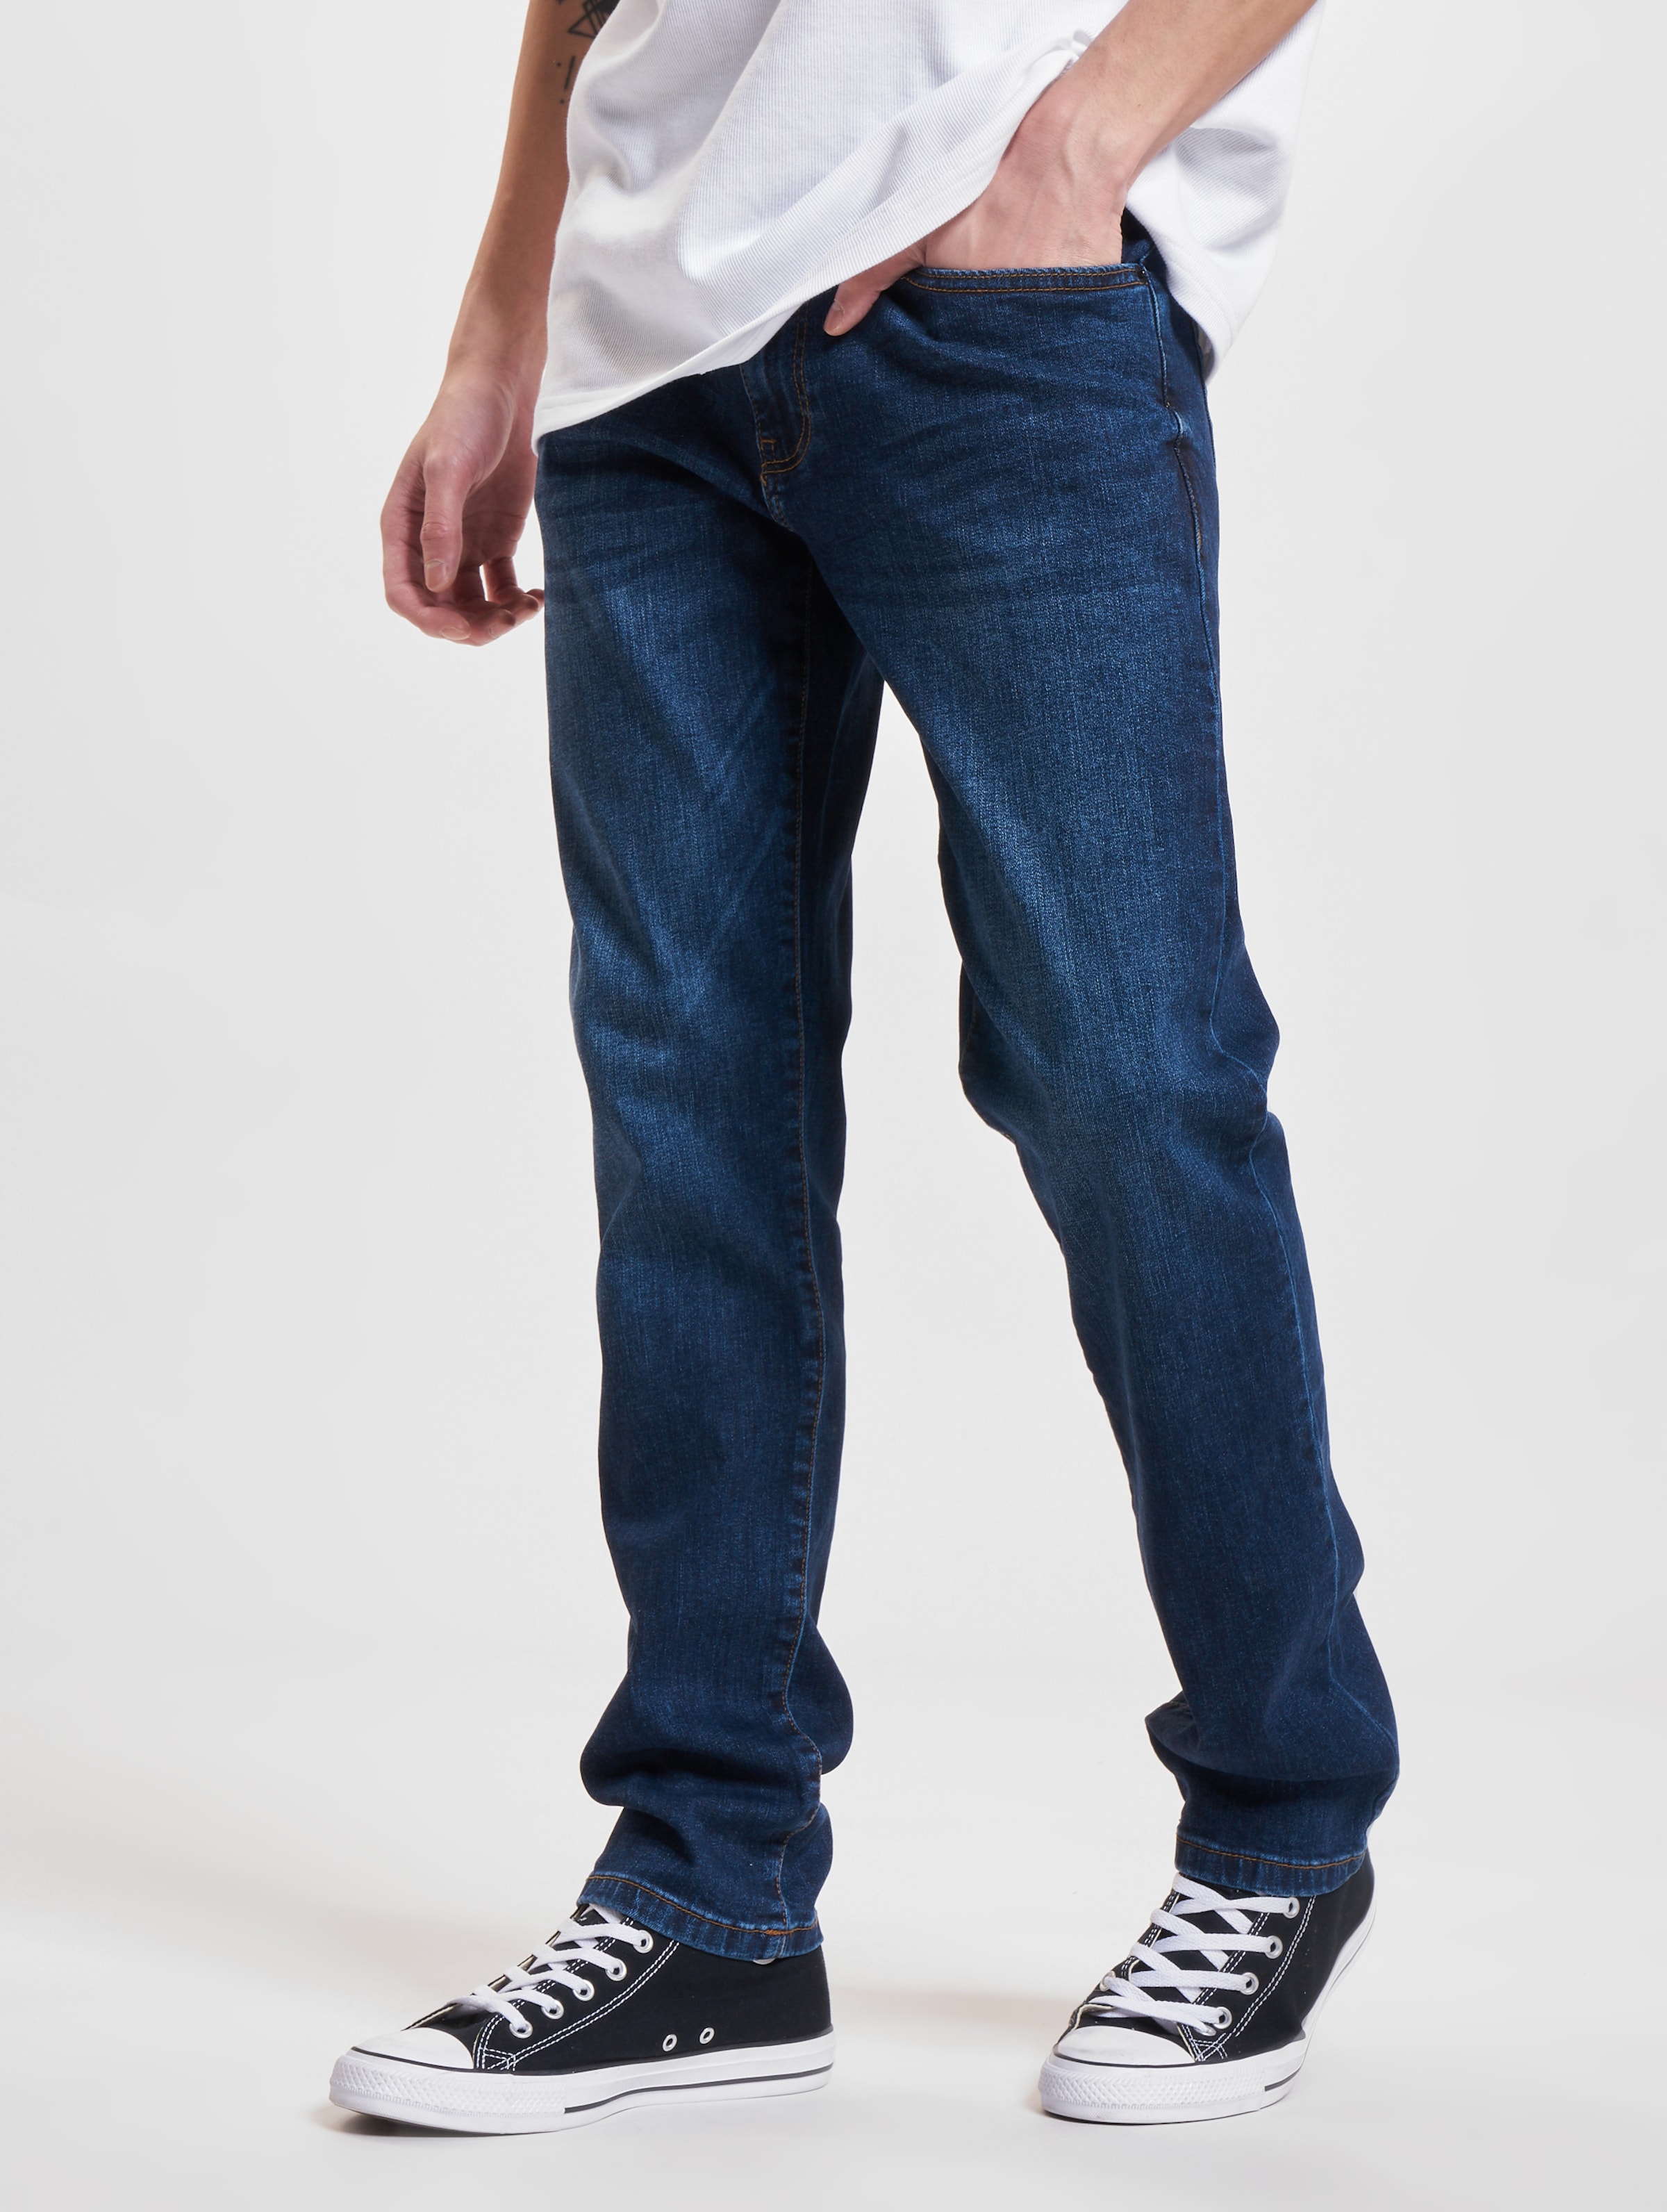 ONLY & SONS ONSWEFT REG.DK. BLUE 6752 DNM JEANS NOOS Heren Jeans - Maat W30 X L32